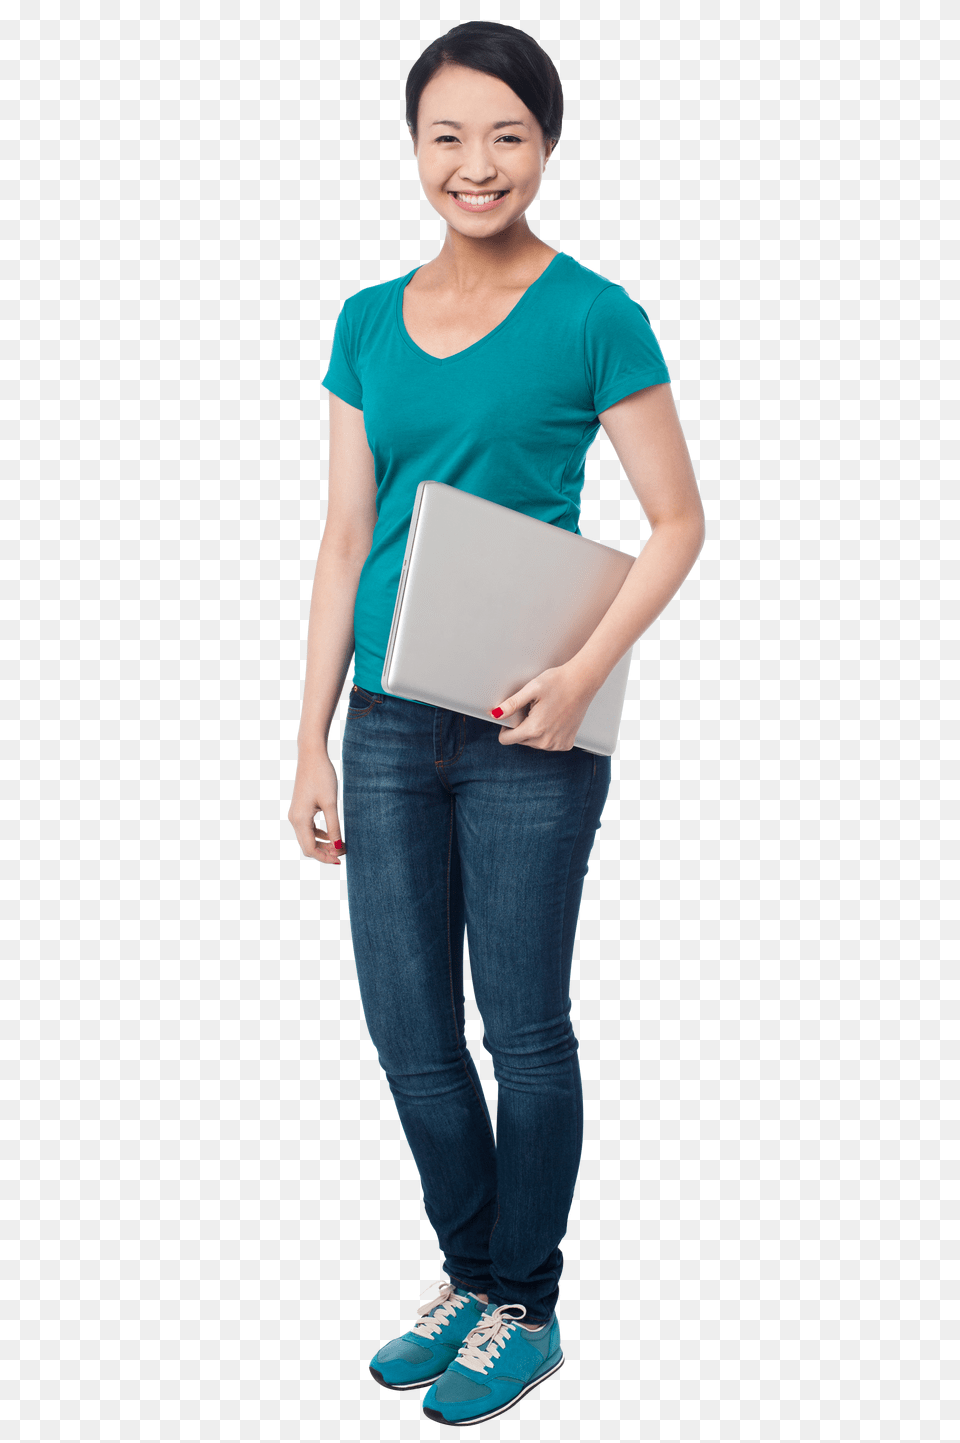 Standing Girl Image Free Png Download